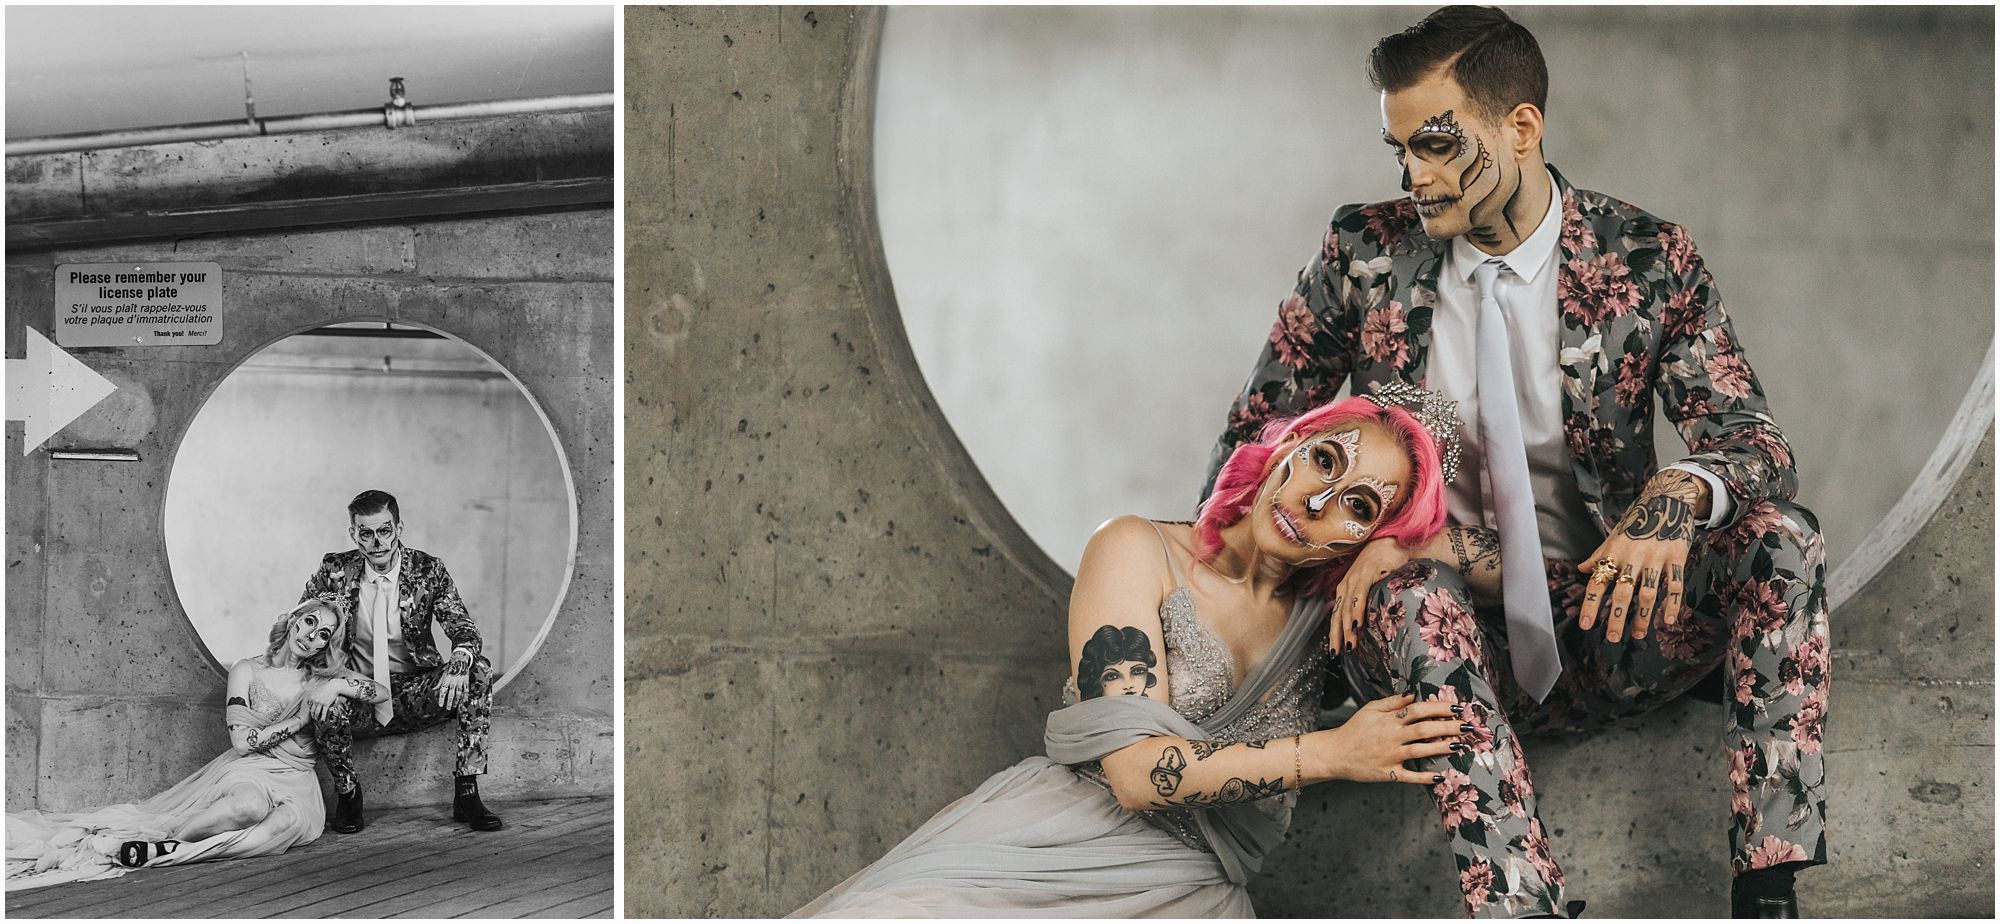 Vancouver bride and groom in parkade for edgy portraits